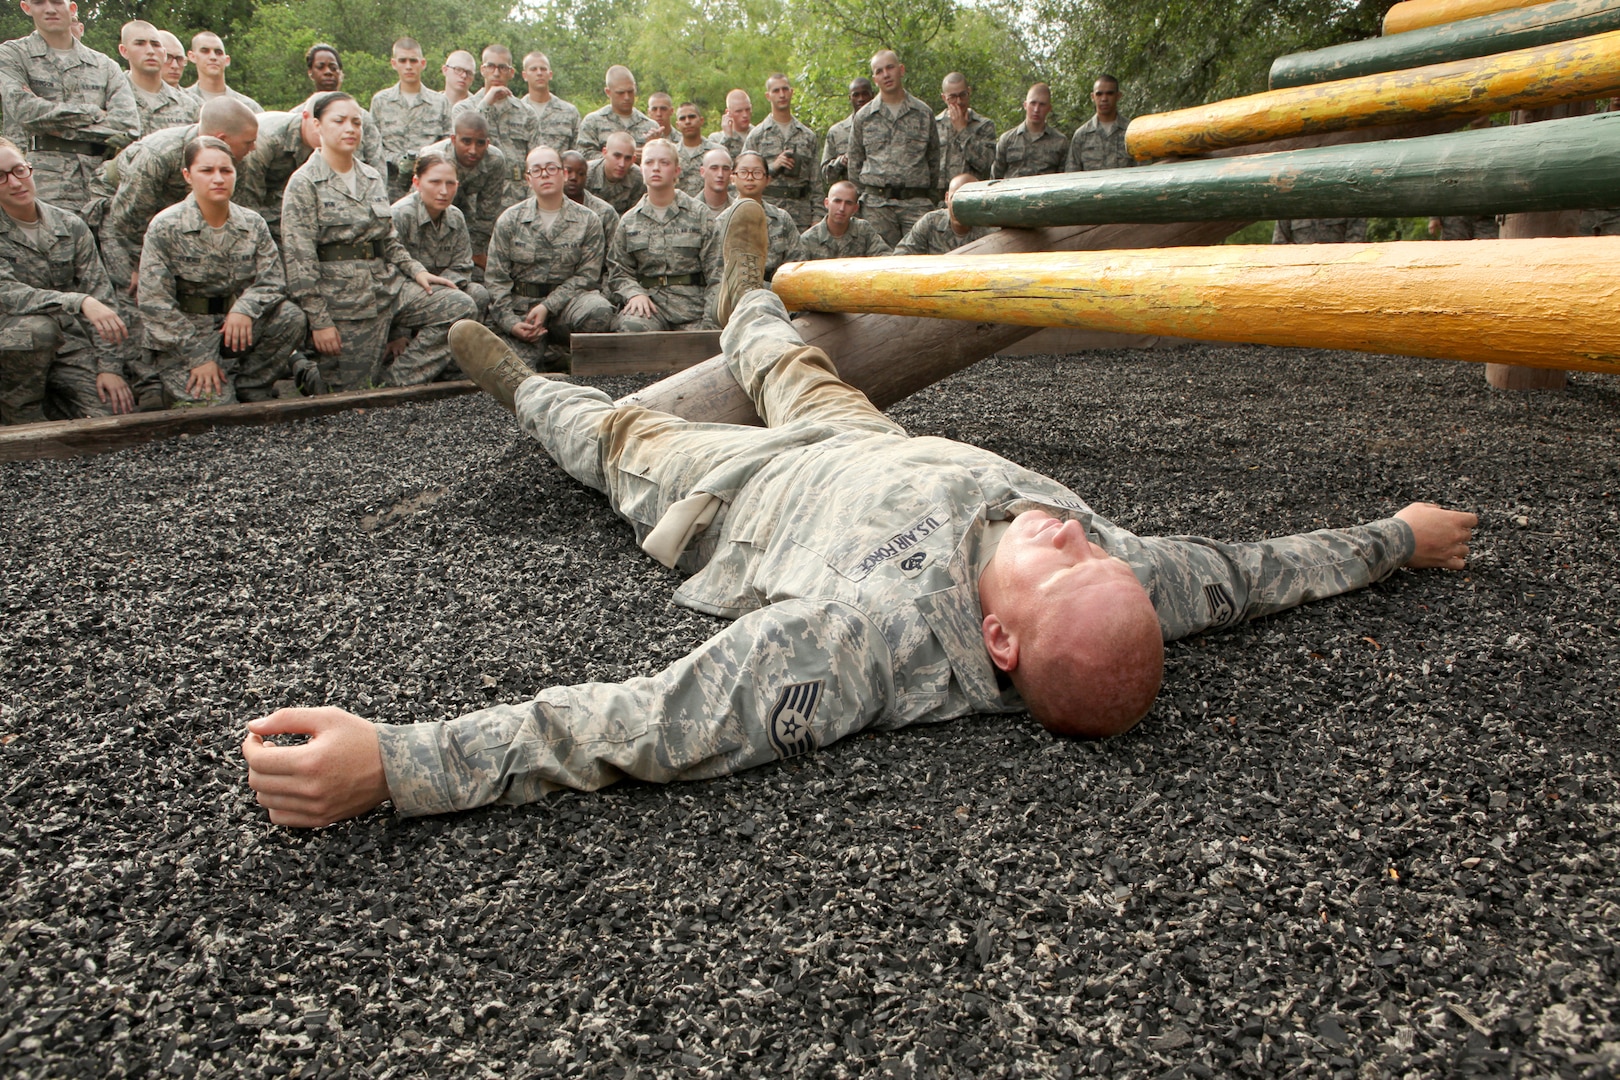 Staff Sgt. Robert Fitte, 319th Training Squadron, demonstrates how to begin an obstacle June 30. Before attempting the obstacle course, Air Force Basic Military Training trainees are briefed on proper technique and safety. (U.S. Air Force photo/Robbin Cresswell)